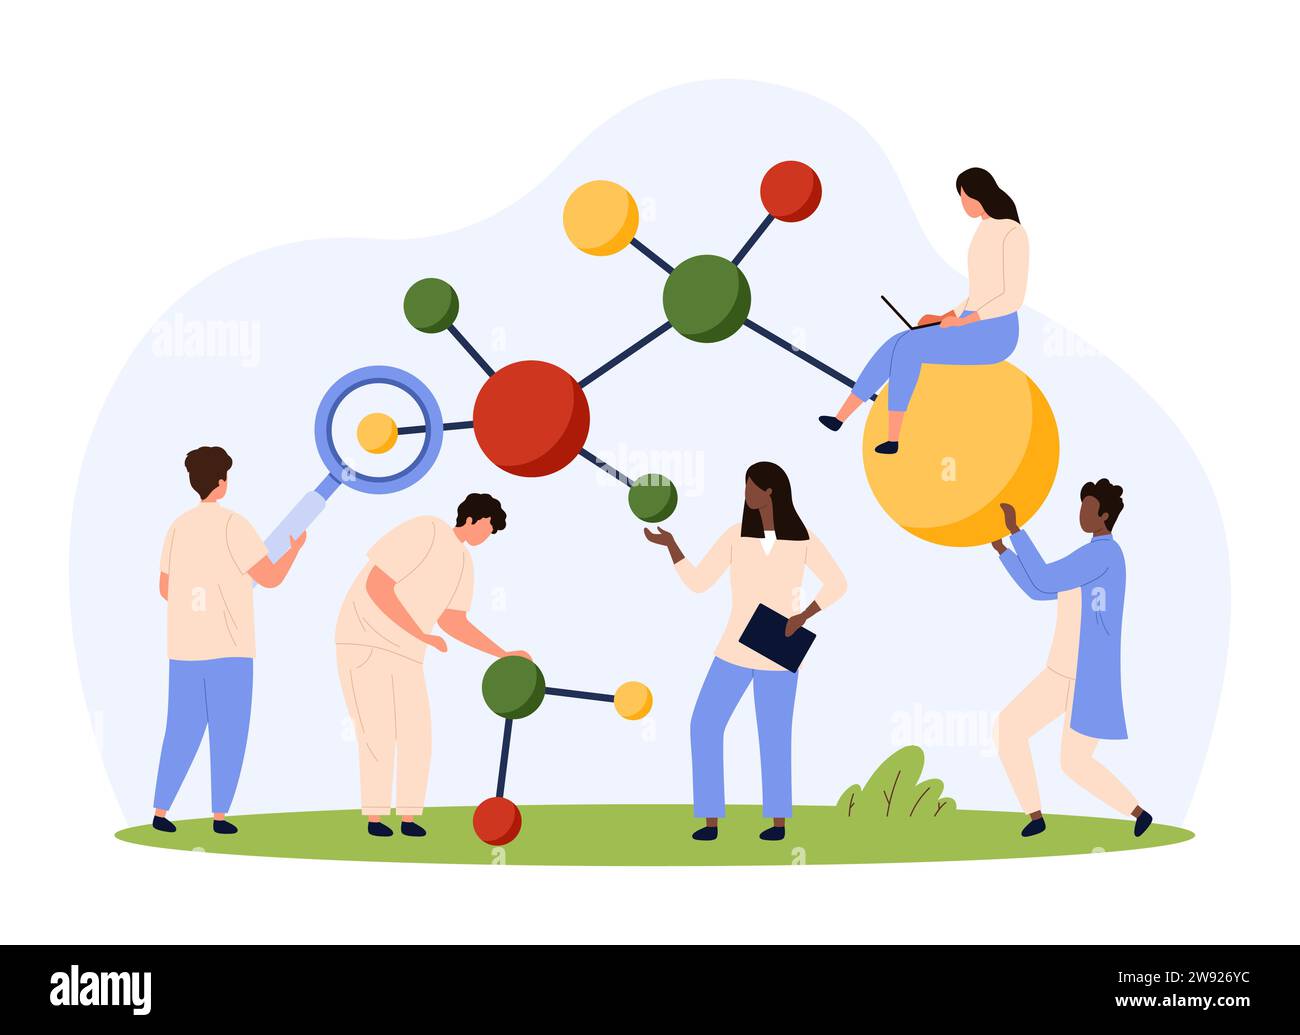 Molecular structure and genetic research vector illustration. Cartoon tiny people work on analysis of molecule digital model with atom spheres and chains, biochemistry or biotechnology construction Stock Vector